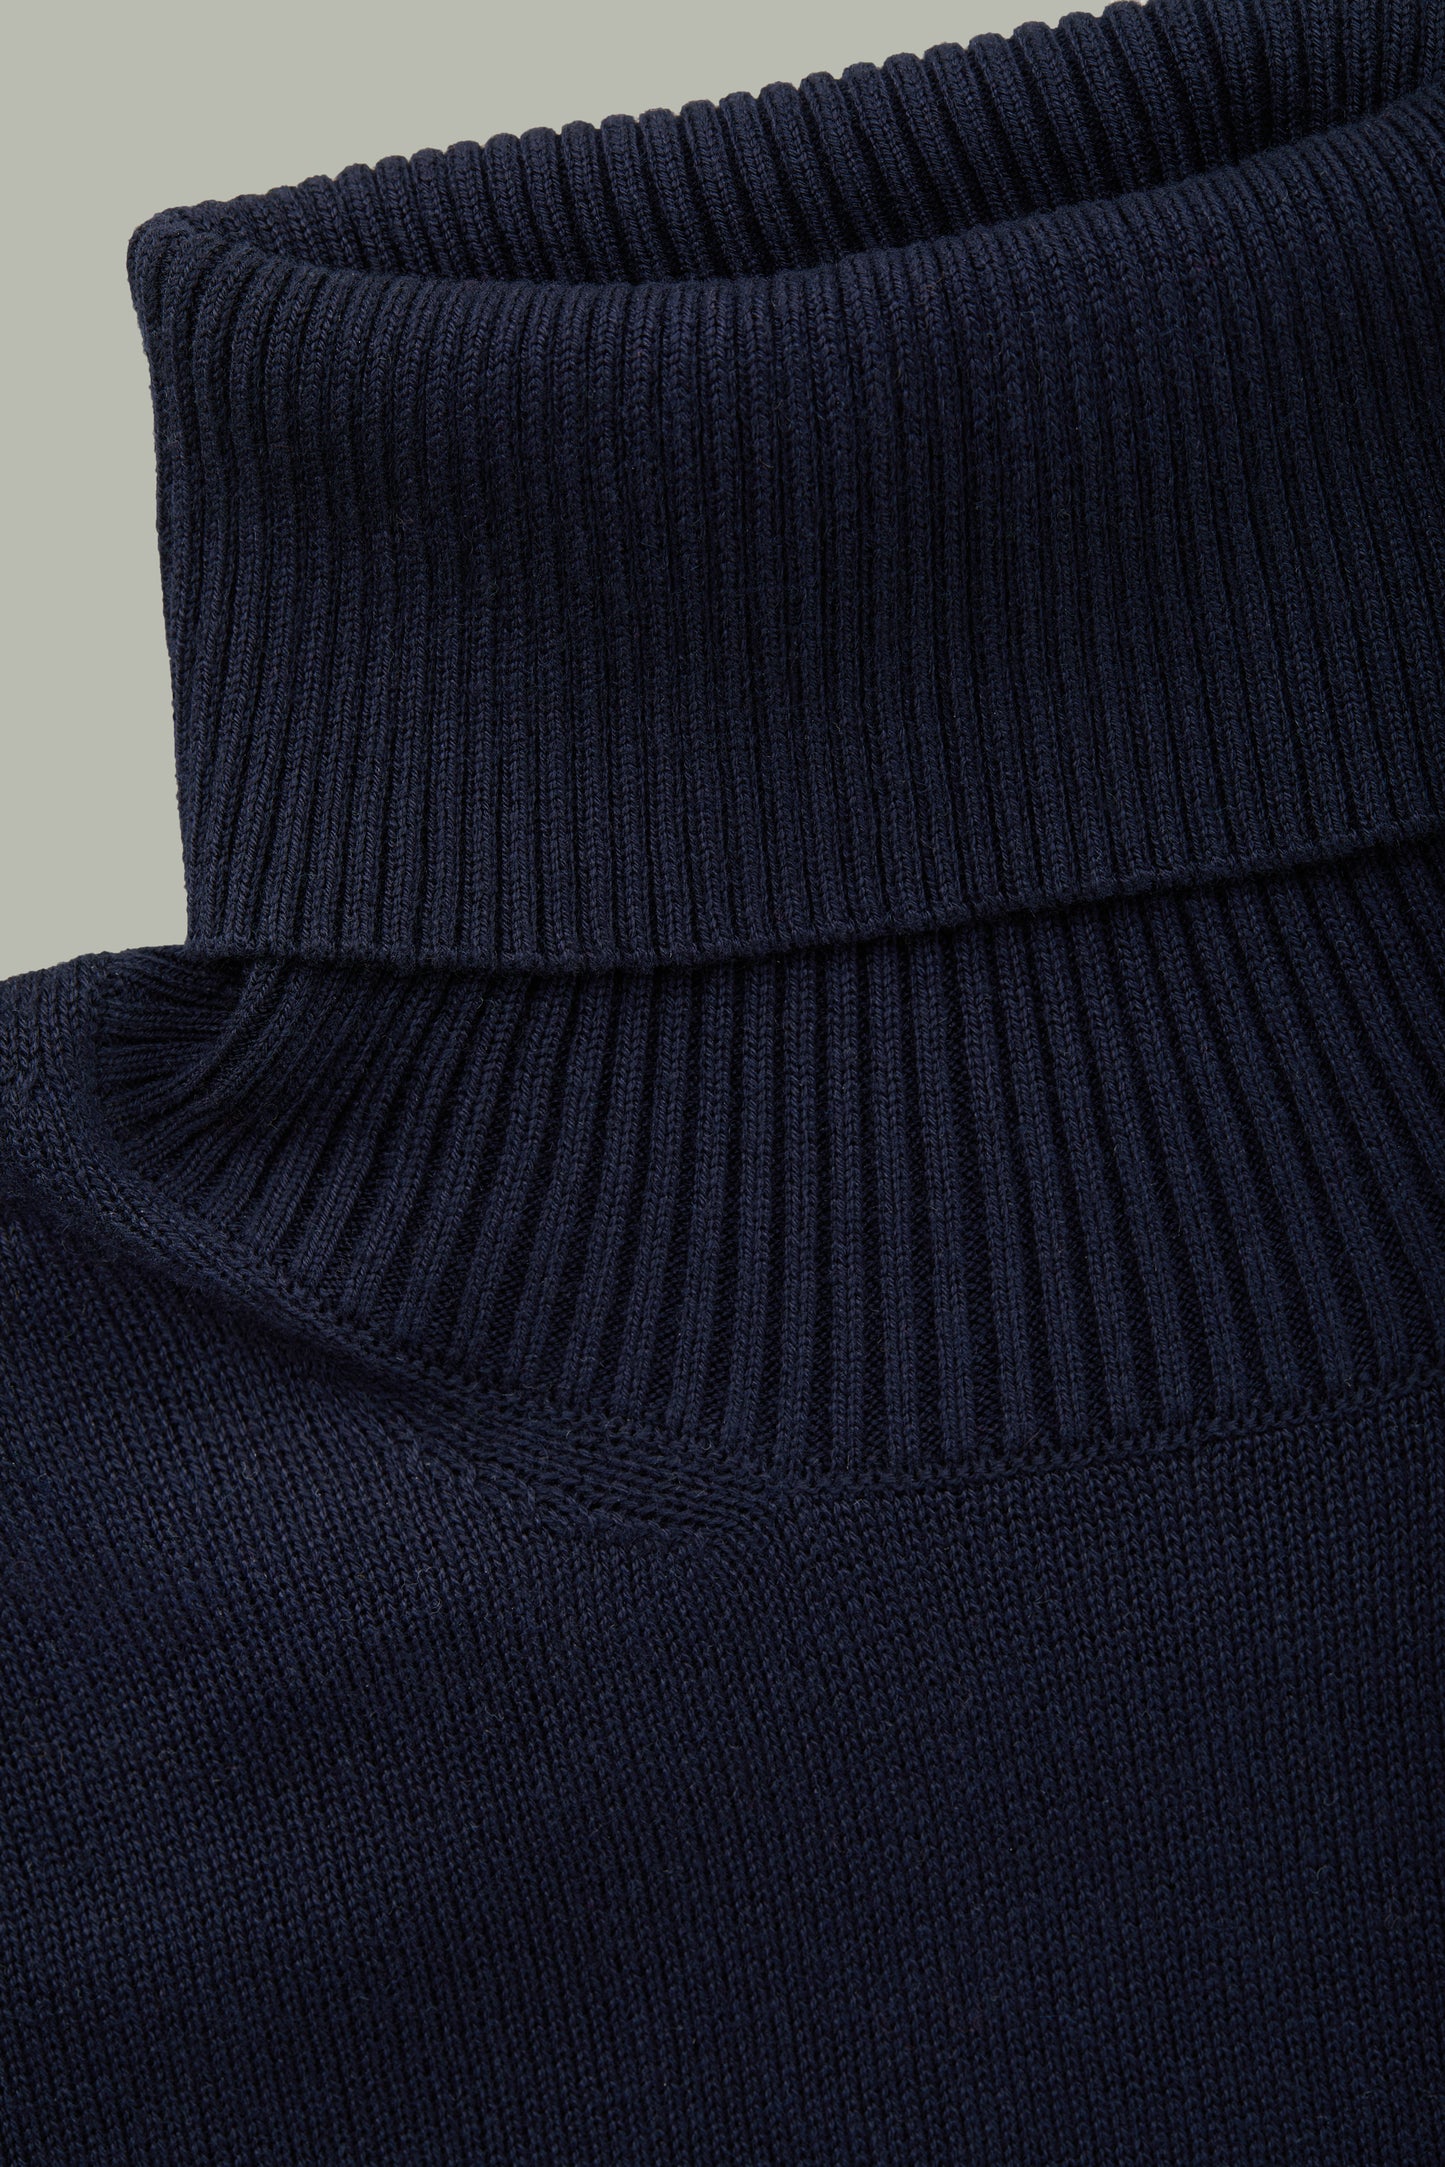 Long Sleeve Turtleneck Bamboo Cotton Cashmere Blend Knitted Sweater Navy